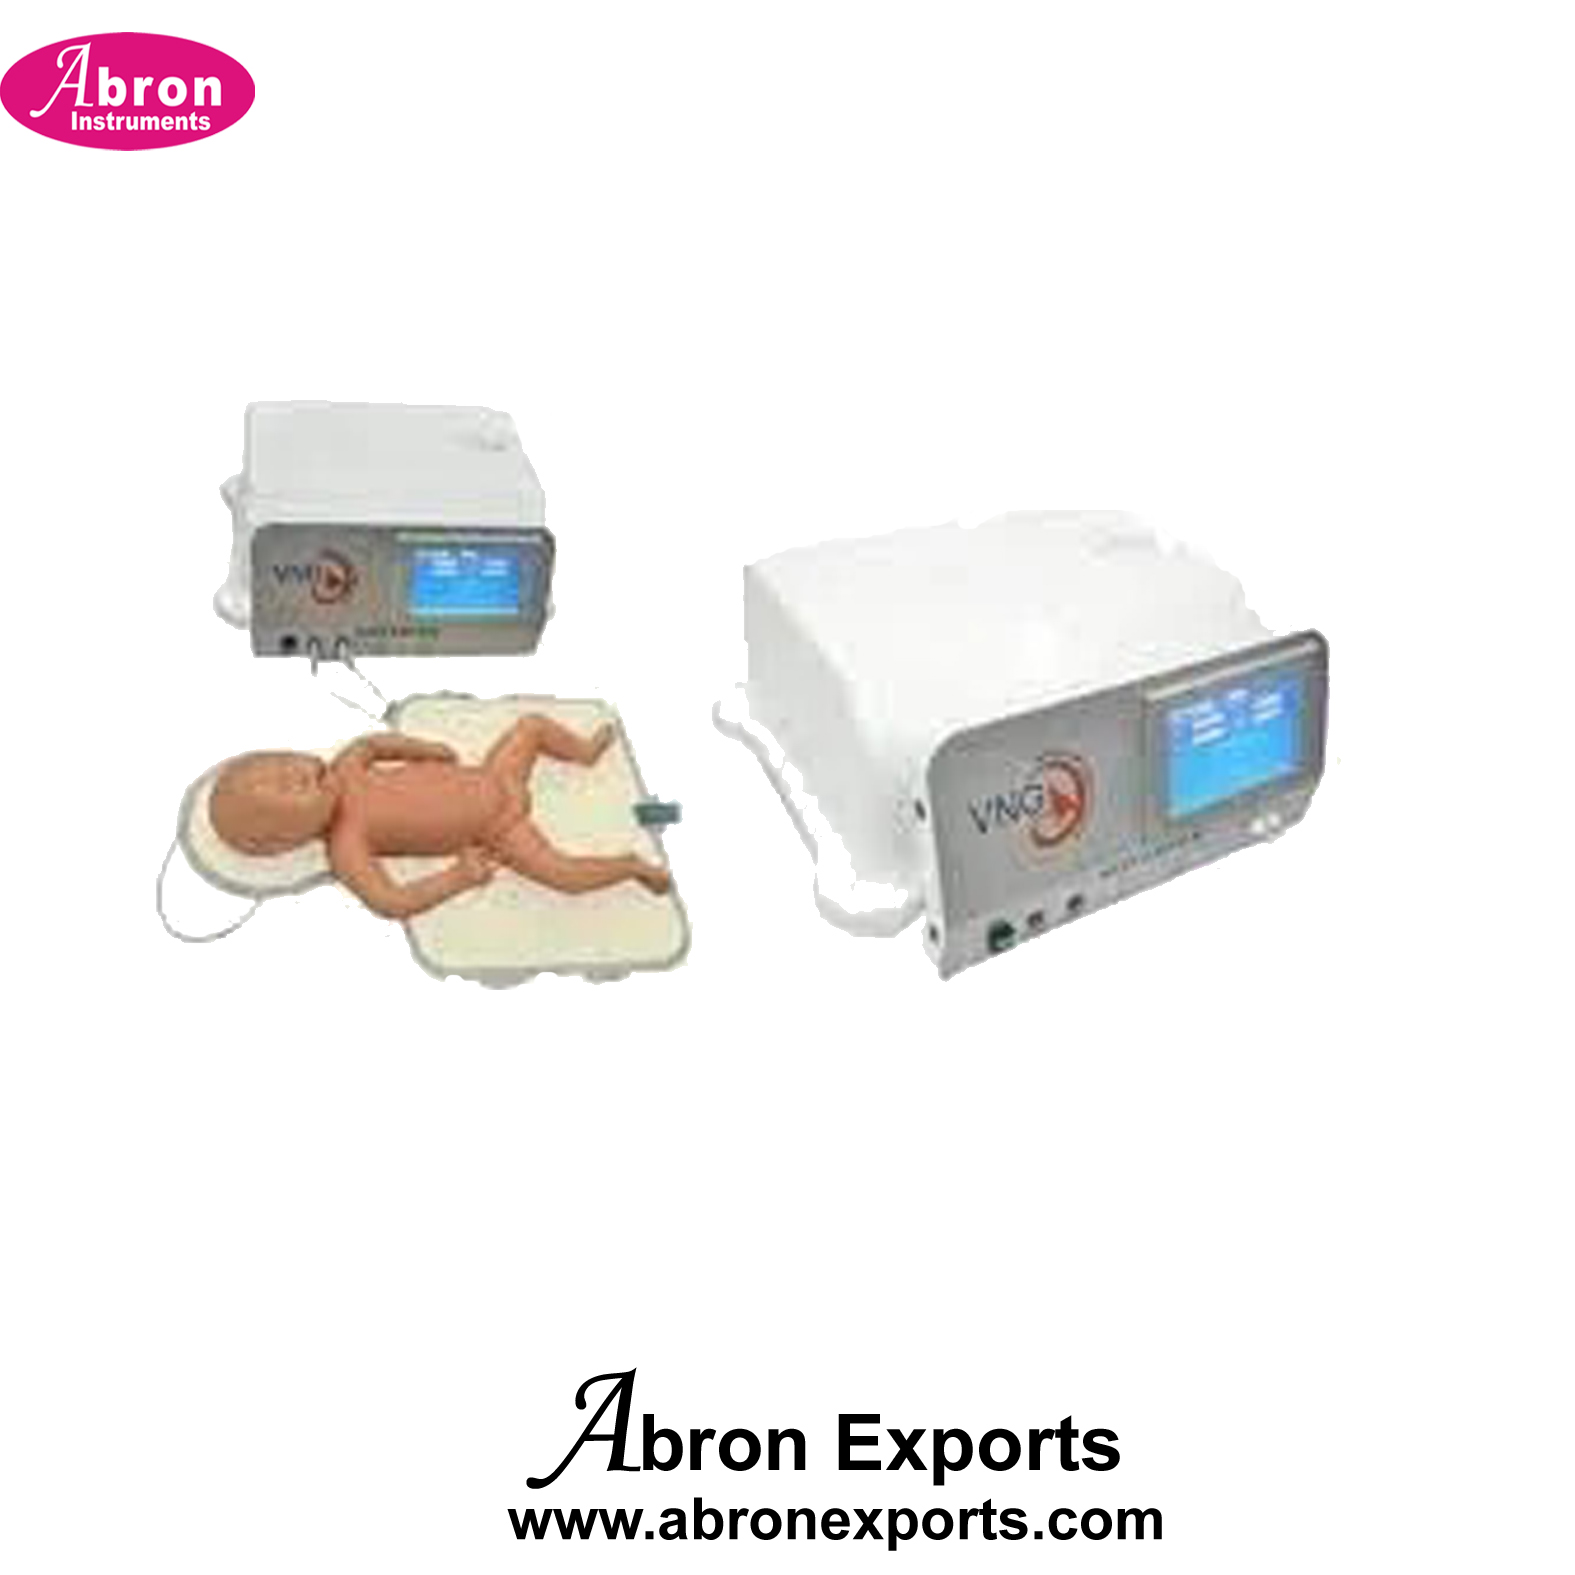 NICU Brain Cooling Unit baby Neothermal Neonetal Full body Cooling systems Hospital Nursing Home Abron ABM-1118STB 